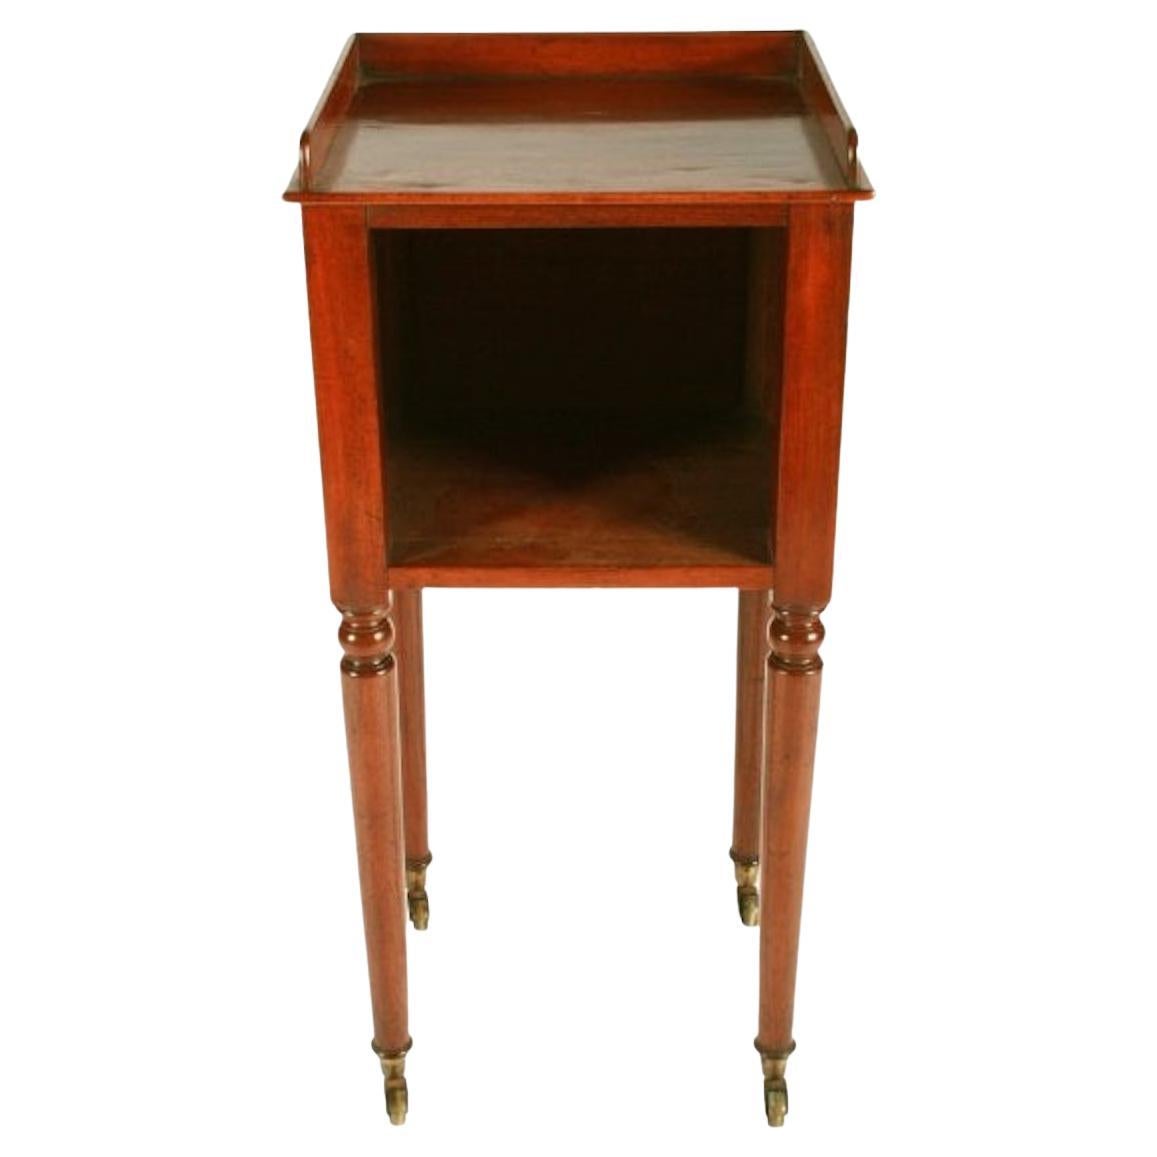 Victorian Bedside Cabinet, 19th Century